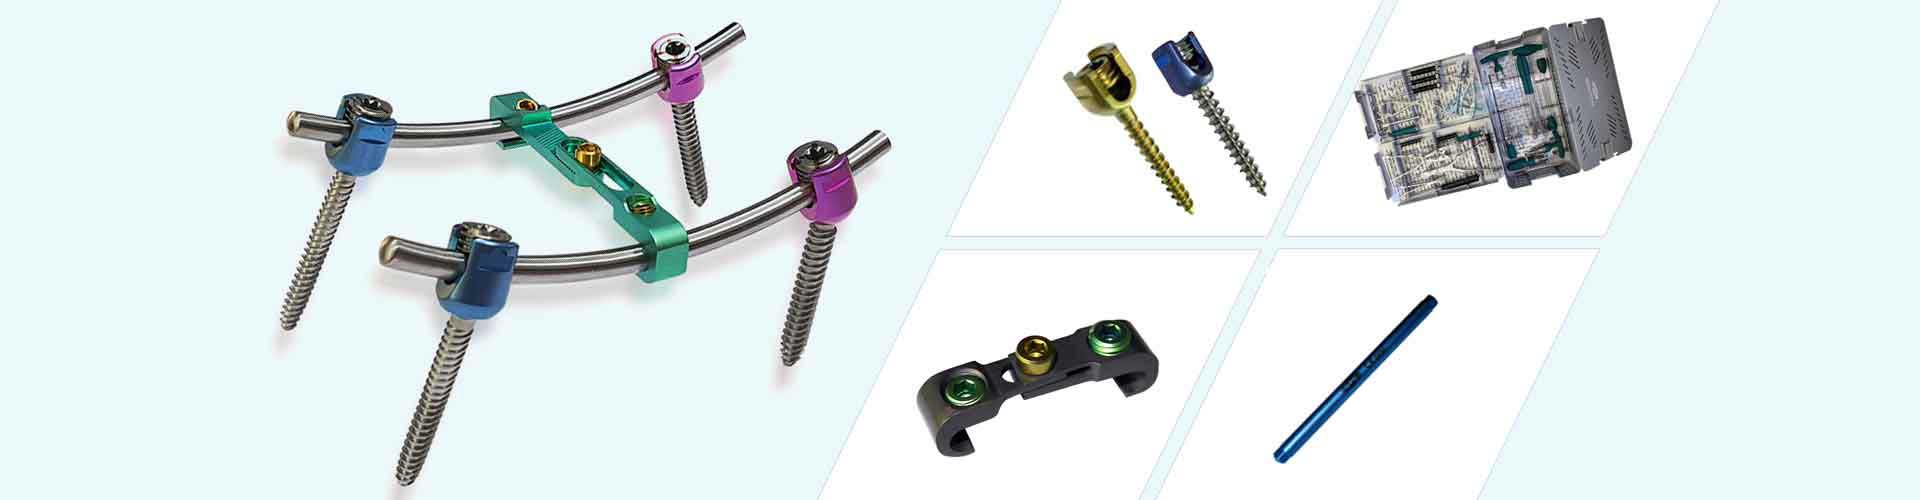 spineHEAL - The Pedicle Screw System